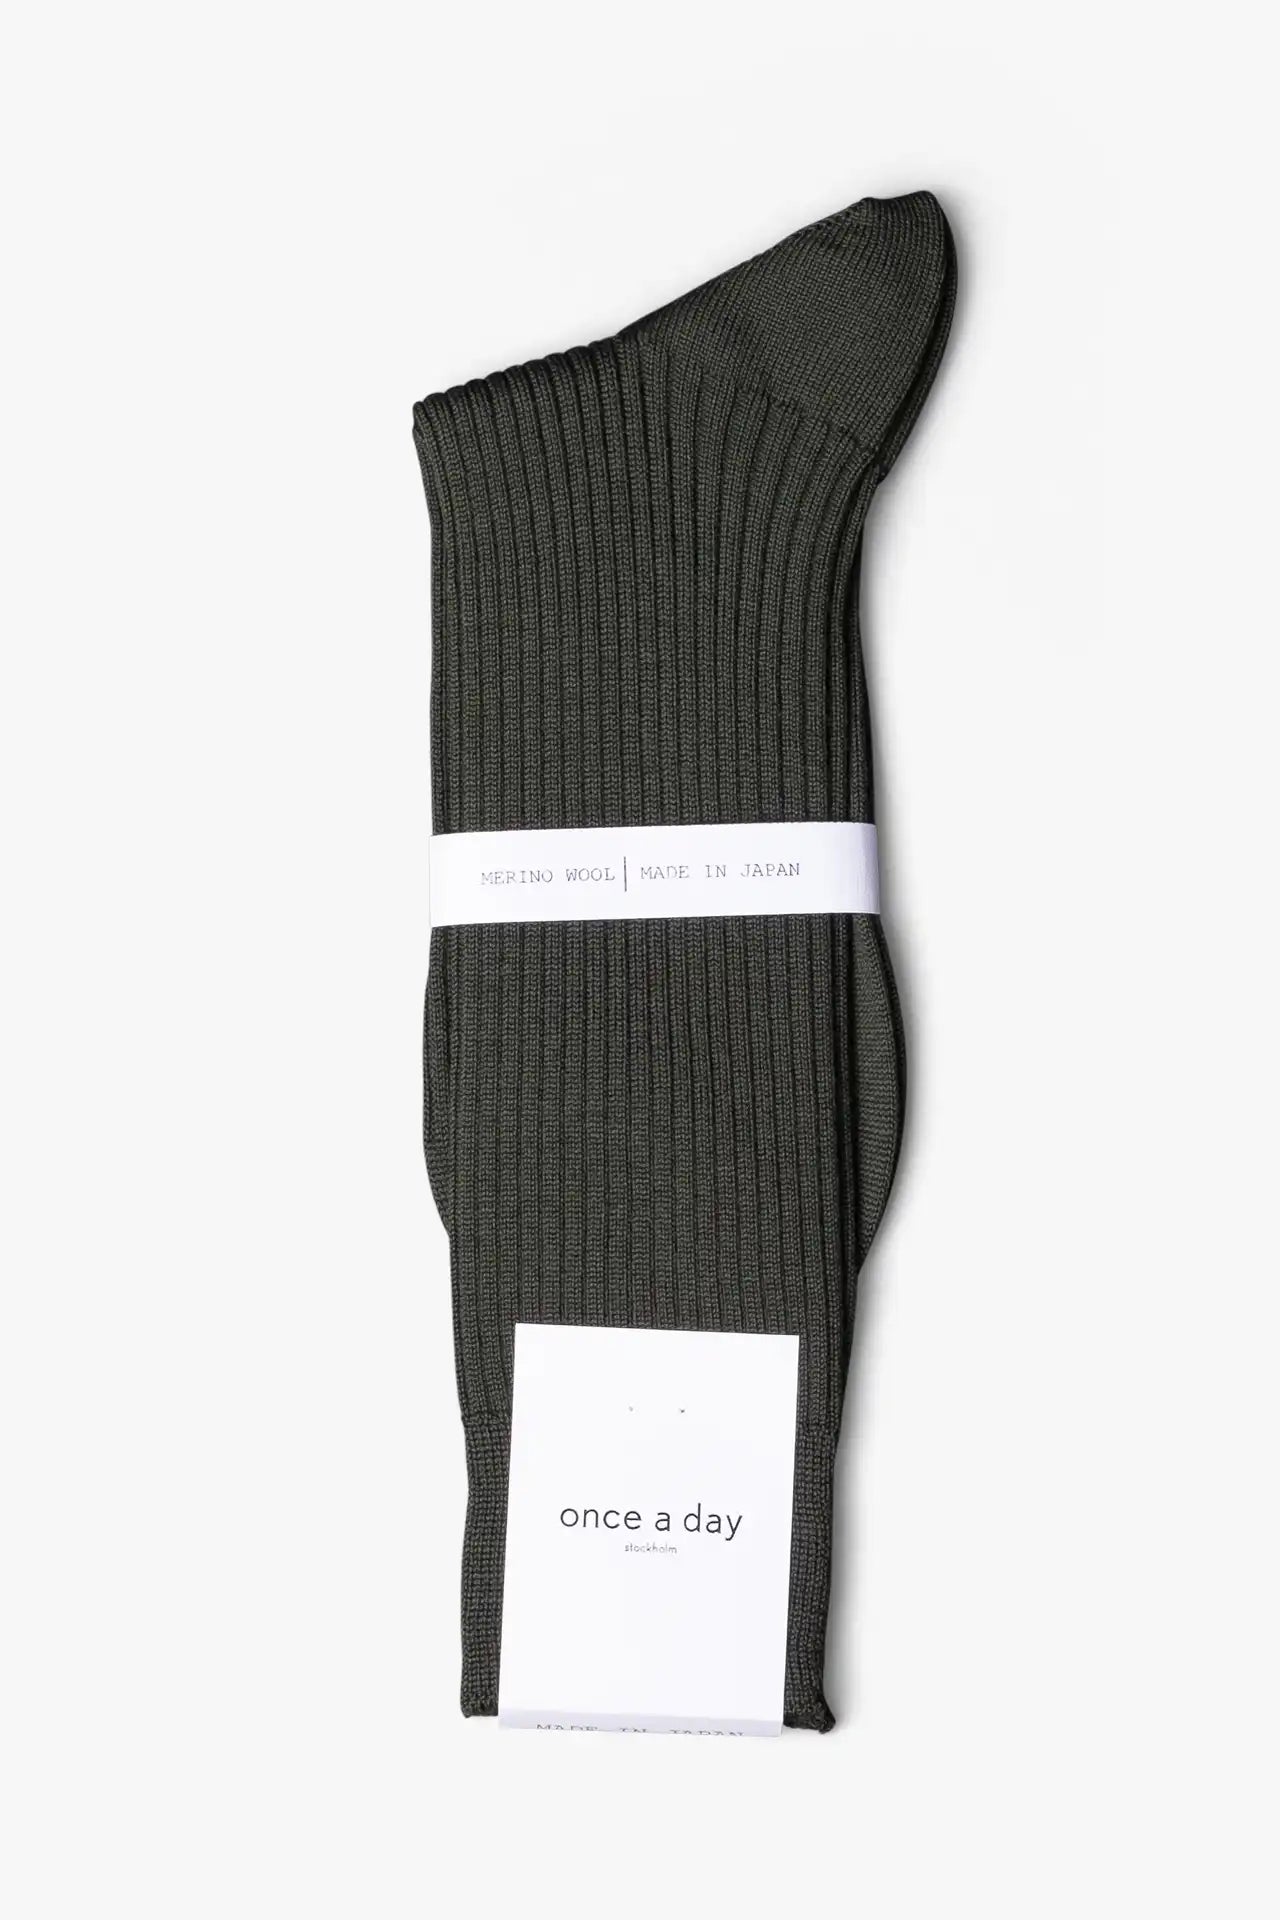 Green dress socks in merino wool. Swedish design by once a day and produced by glenn clyde. Can we washed in warm water without shrinking.